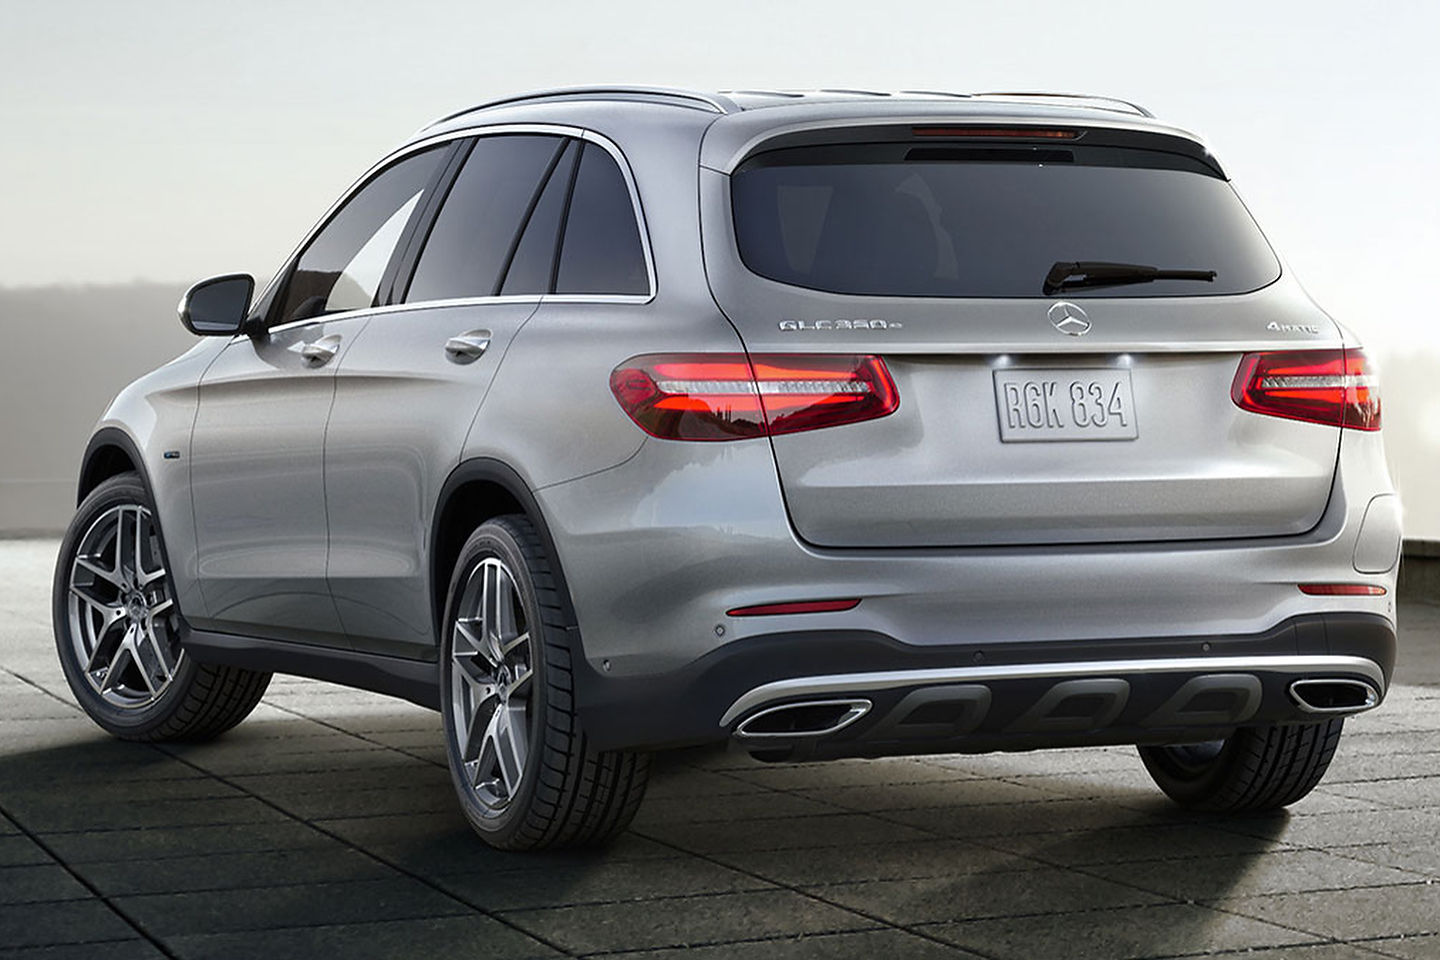 2019 Mercedes-Benz GLC : the kind of luxury we expect from